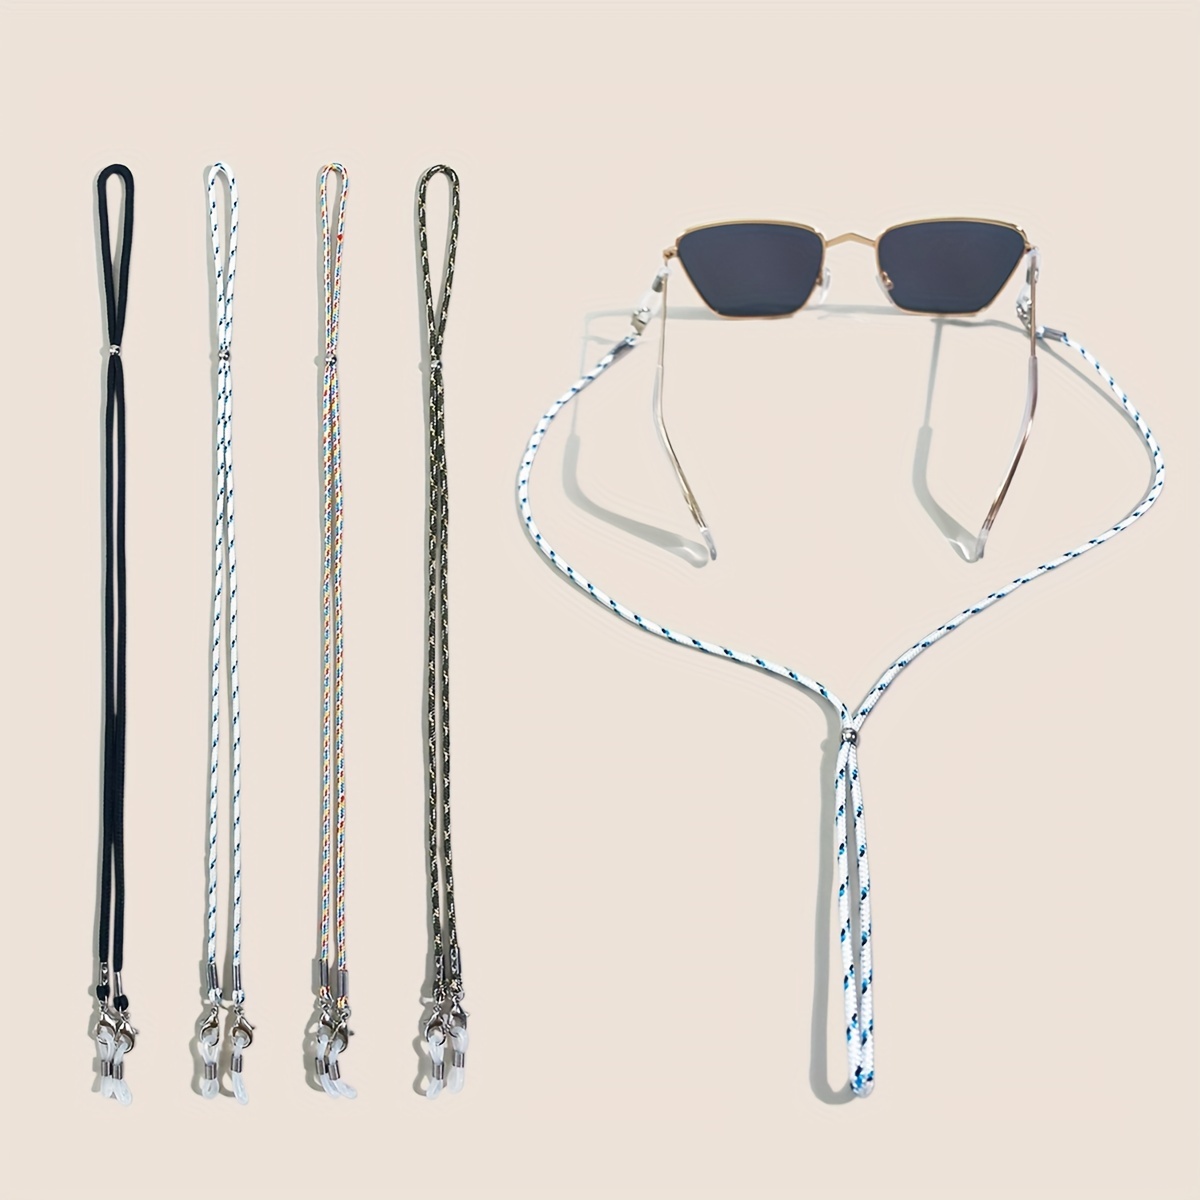 

4pcs, Fresh Cool Boho Style Colorful Glasses Straps, Adjustable Sunglasses Lanyards, Comfortable Practical Glasses Fixers, Outdoor Sports Eyewear Retainers